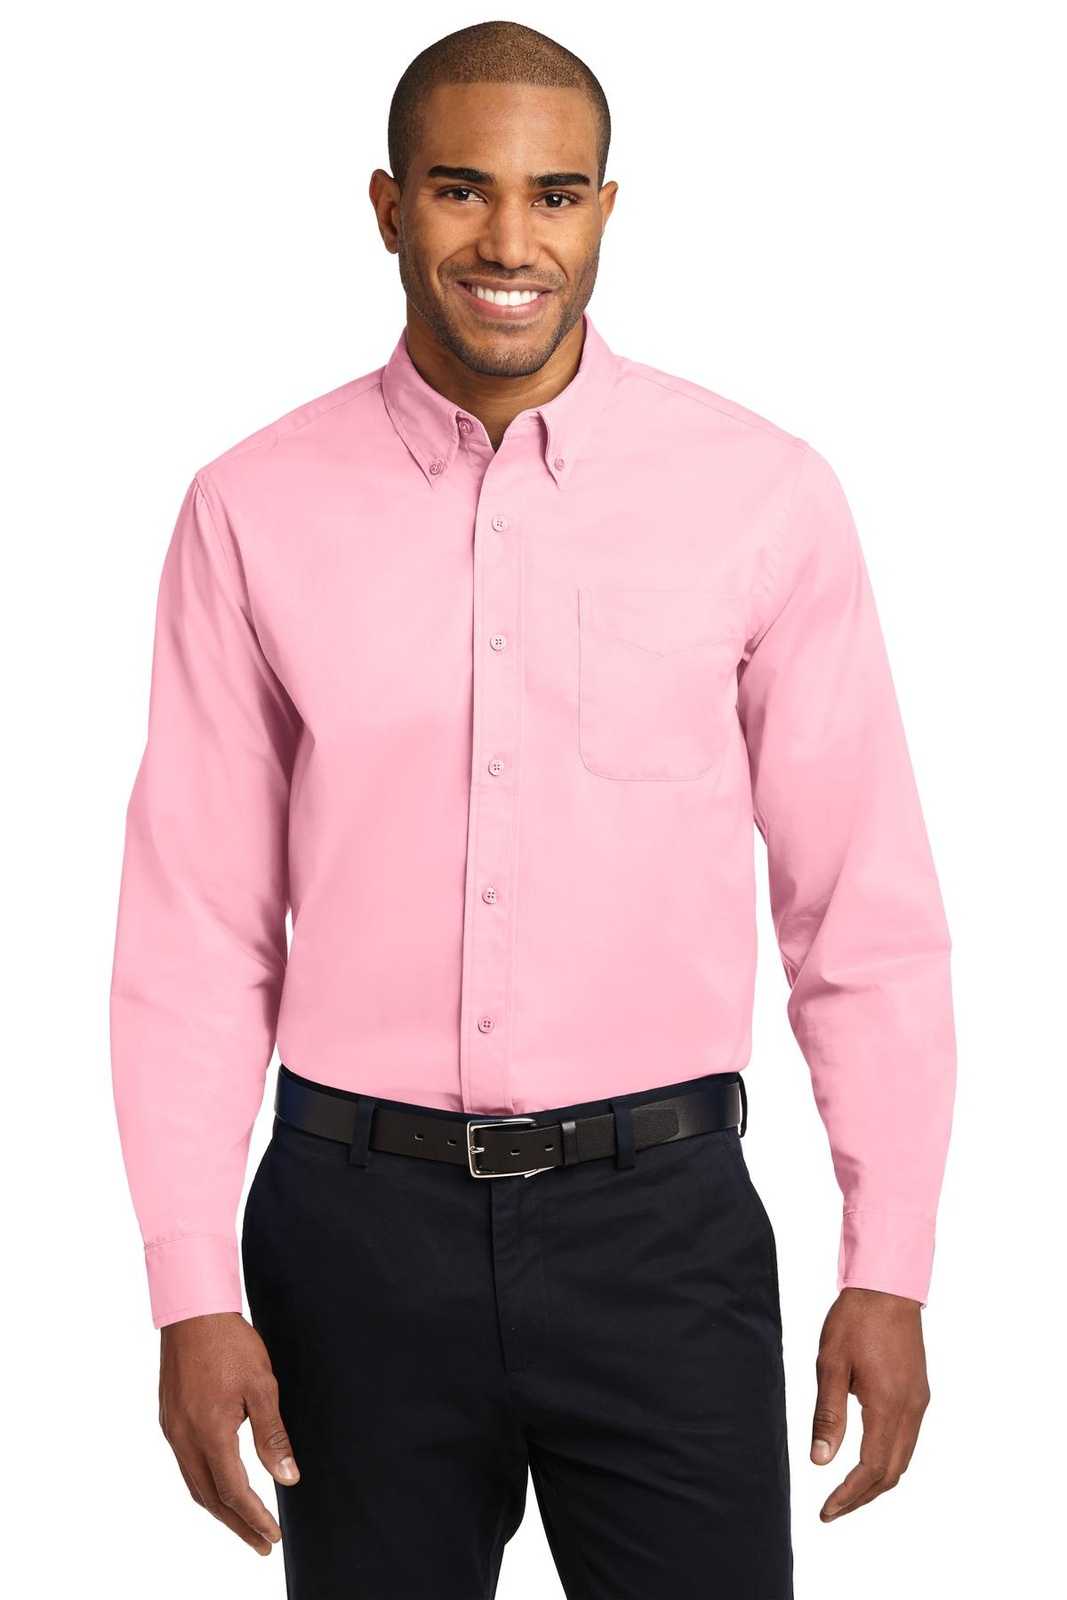 Port Authority S608 Long Sleeve Easy Care Shirt - Light Pink - HIT a Double - 1